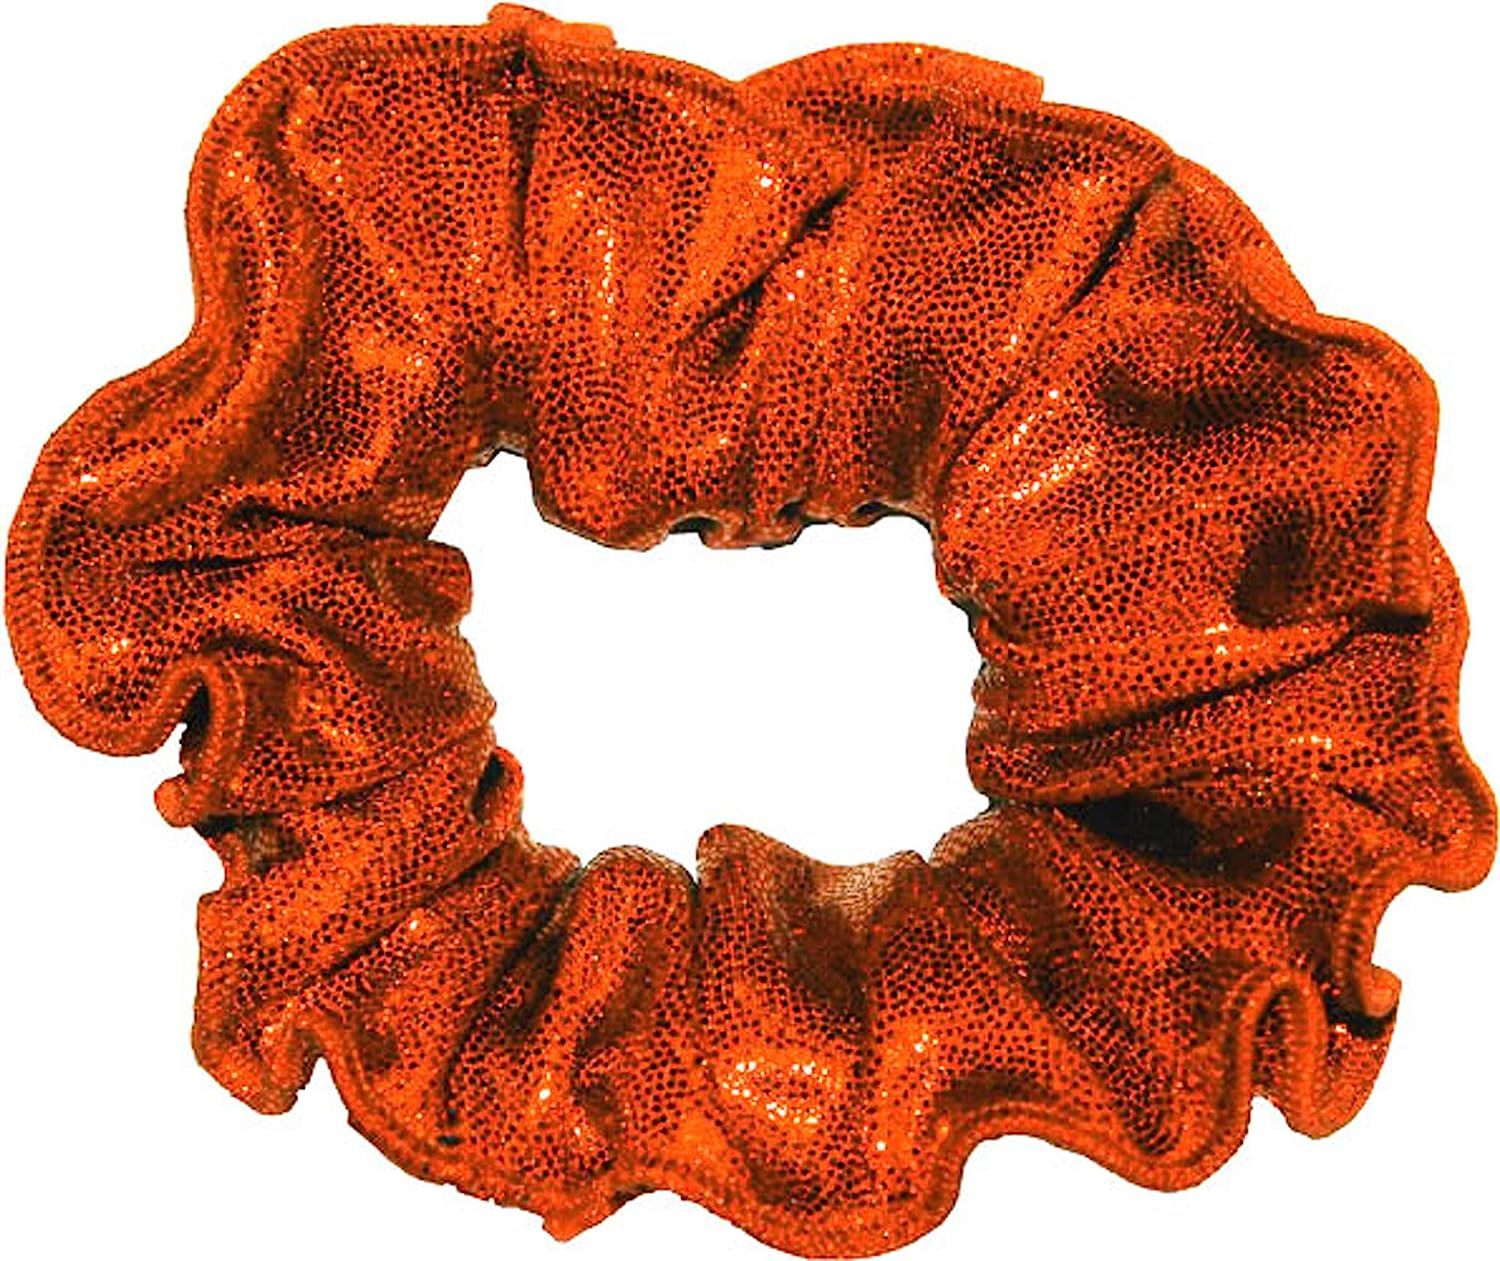 Snowflake Designs Shiny Mystique Hair Scrunchie - Variety of Colors | Amazon (US)